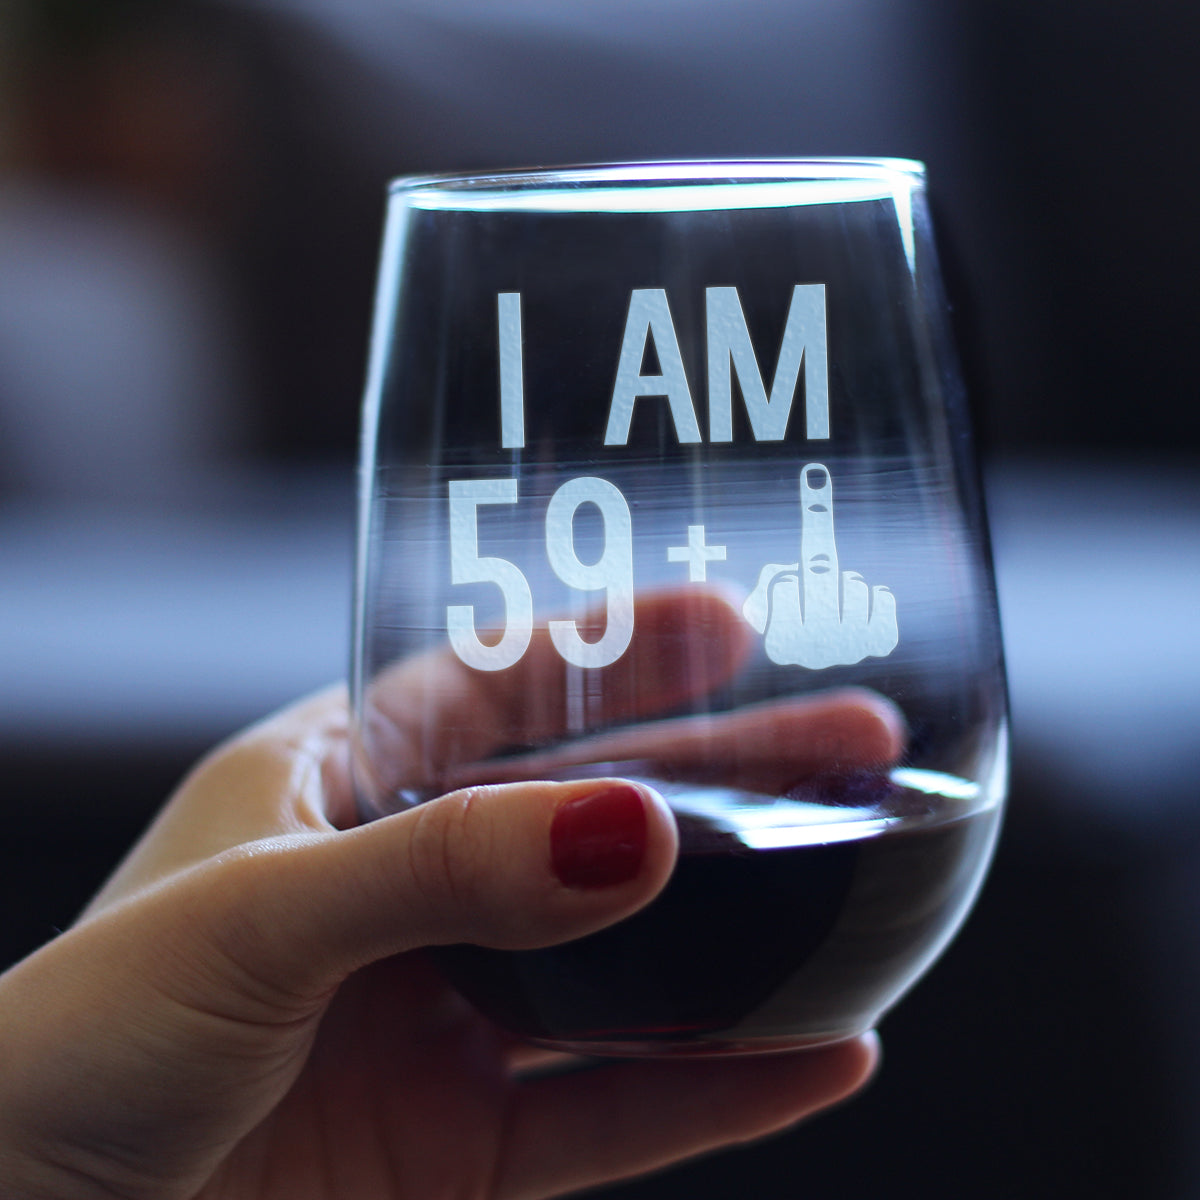 59 + 1 Middle Finger - 60th Birthday Stemless Wine Glass for Women &amp; Men - Cute Funny Wine Gift Idea - Unique Personalized Bday Glasses for Best Friend Turning 60 - Drinking Party Decoration